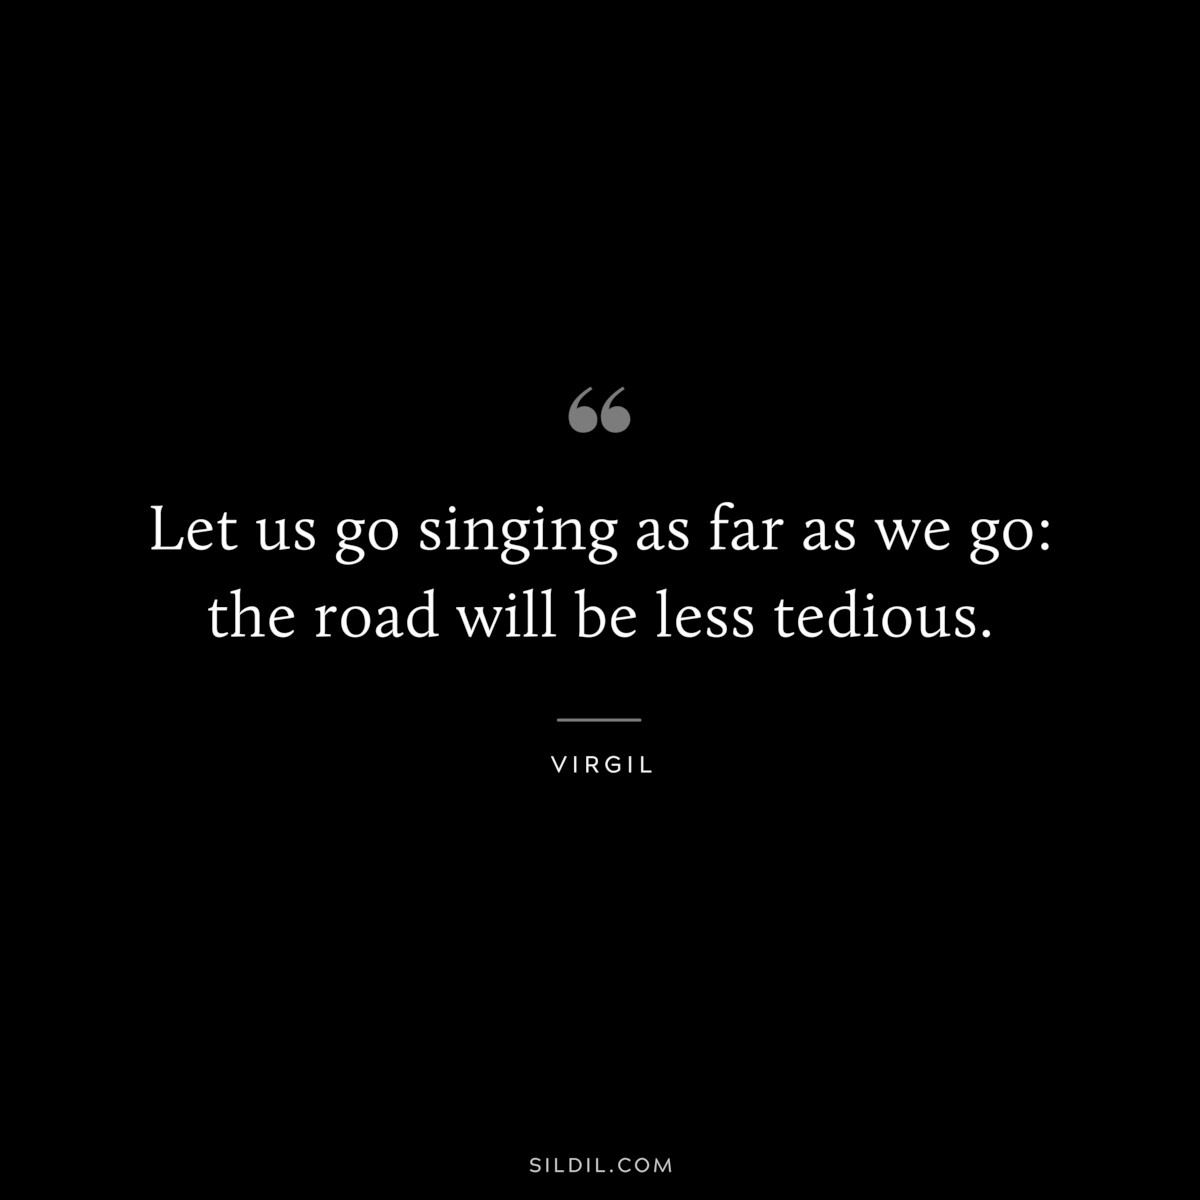 Let us go singing as far as we go: the road will be less tedious. ― Virgil